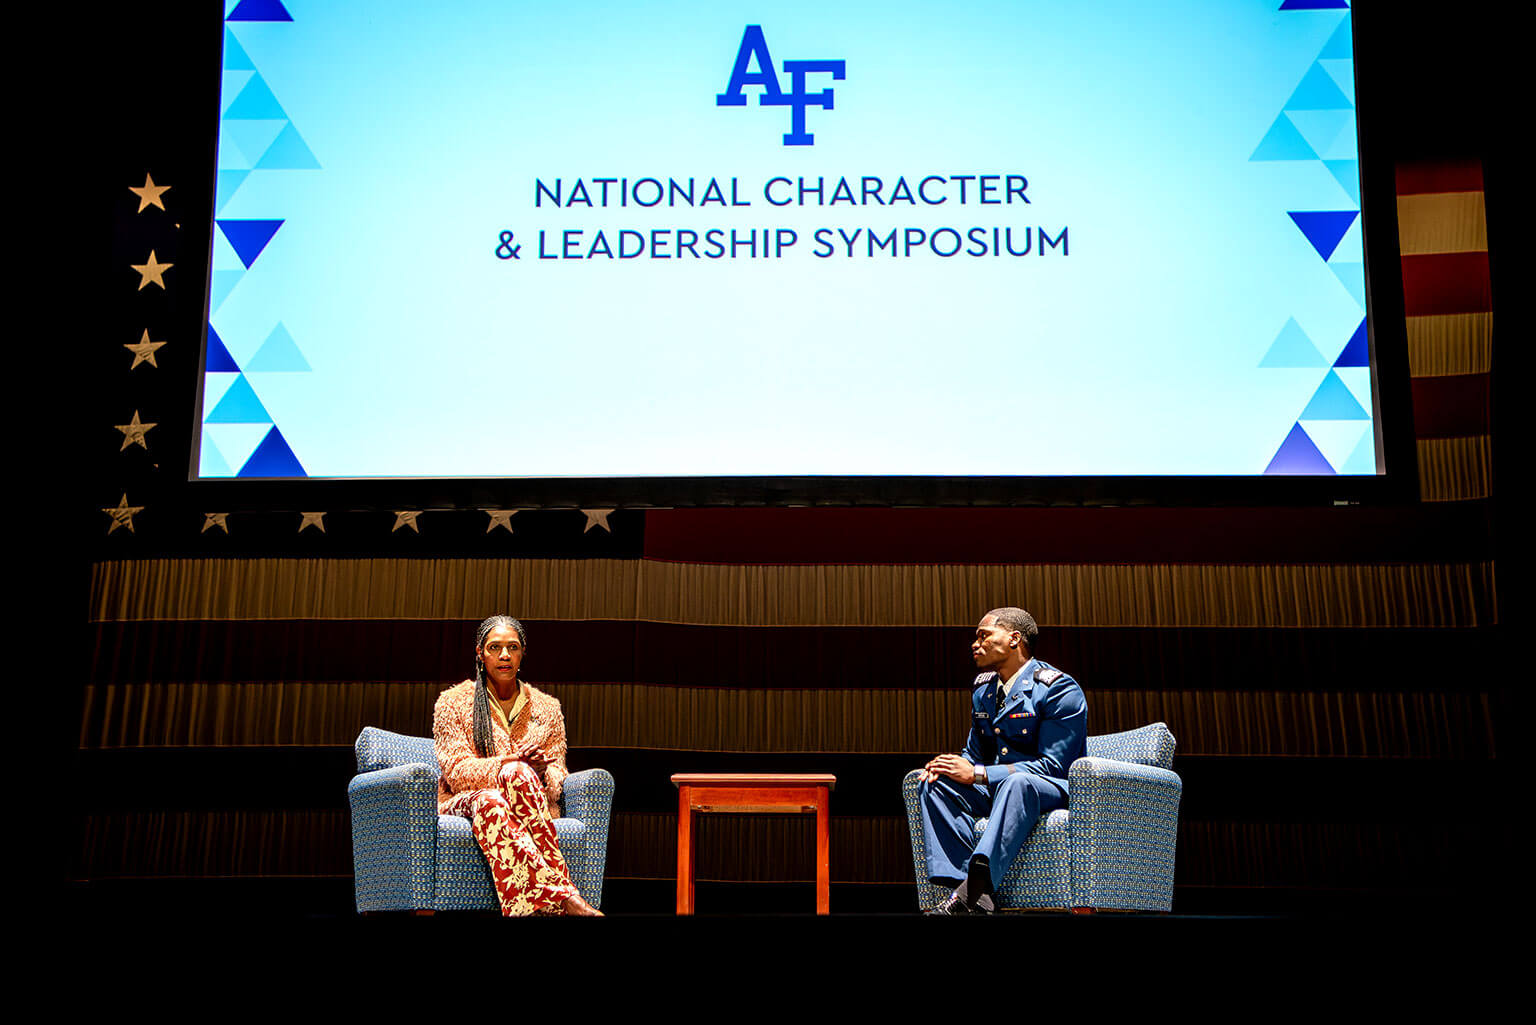 Wounded Warrior Project’s Warriors Speak spokesperson Tonya Oxendine speaks with Cadet 1st Class Nasir Rashid on stage at Arnold Hall.